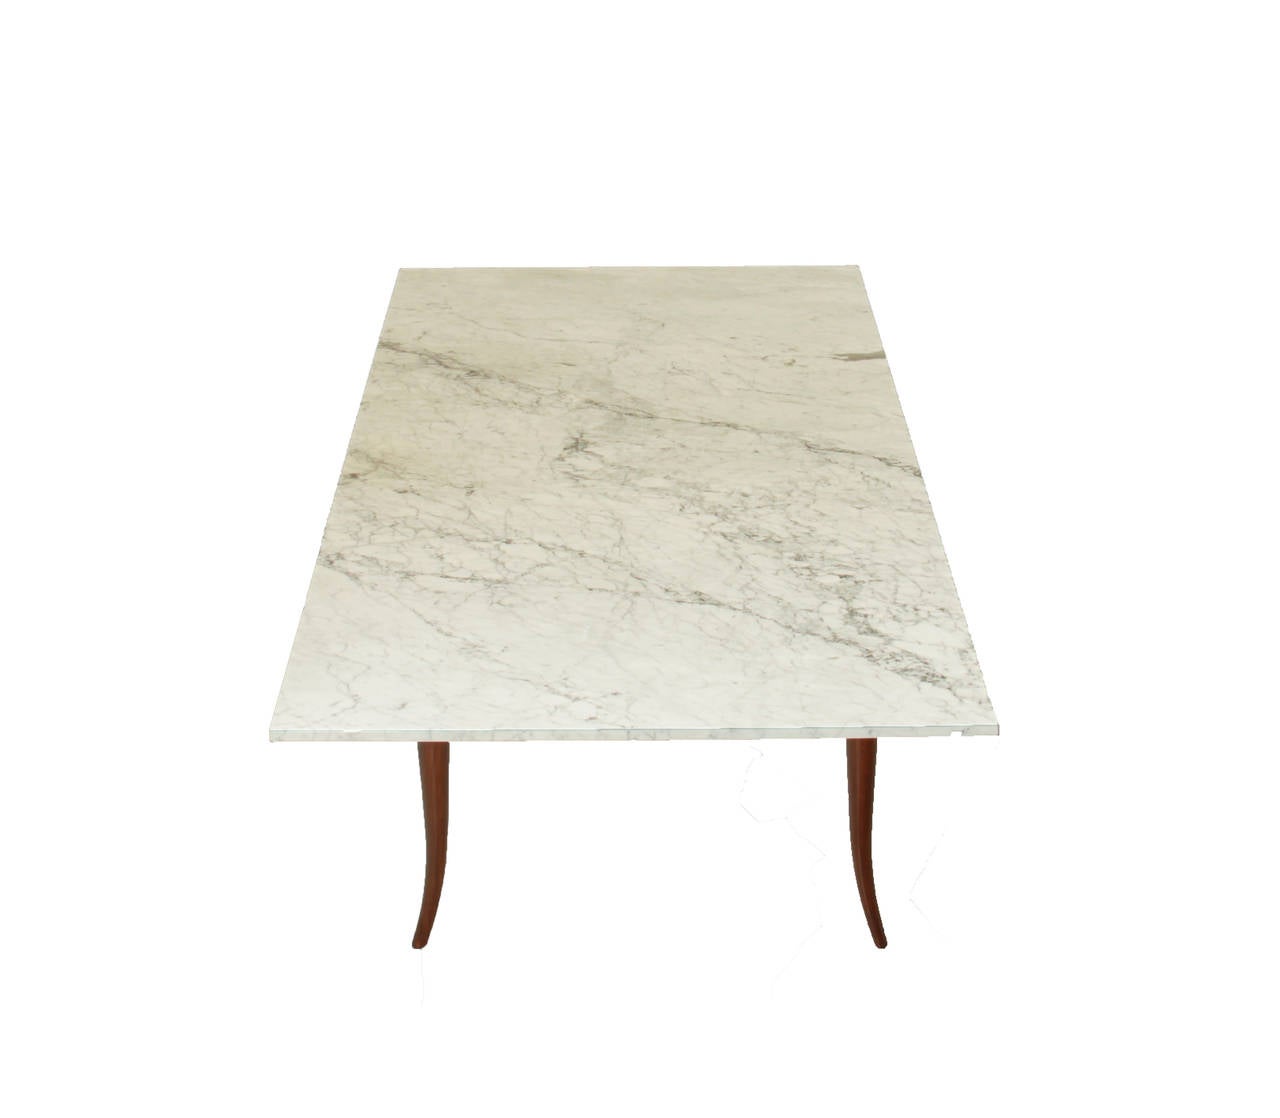 Brazilian Midcentury Solid Caviuna Wood and Carrara Marble Dining Table In Good Condition For Sale In Los Angeles, CA